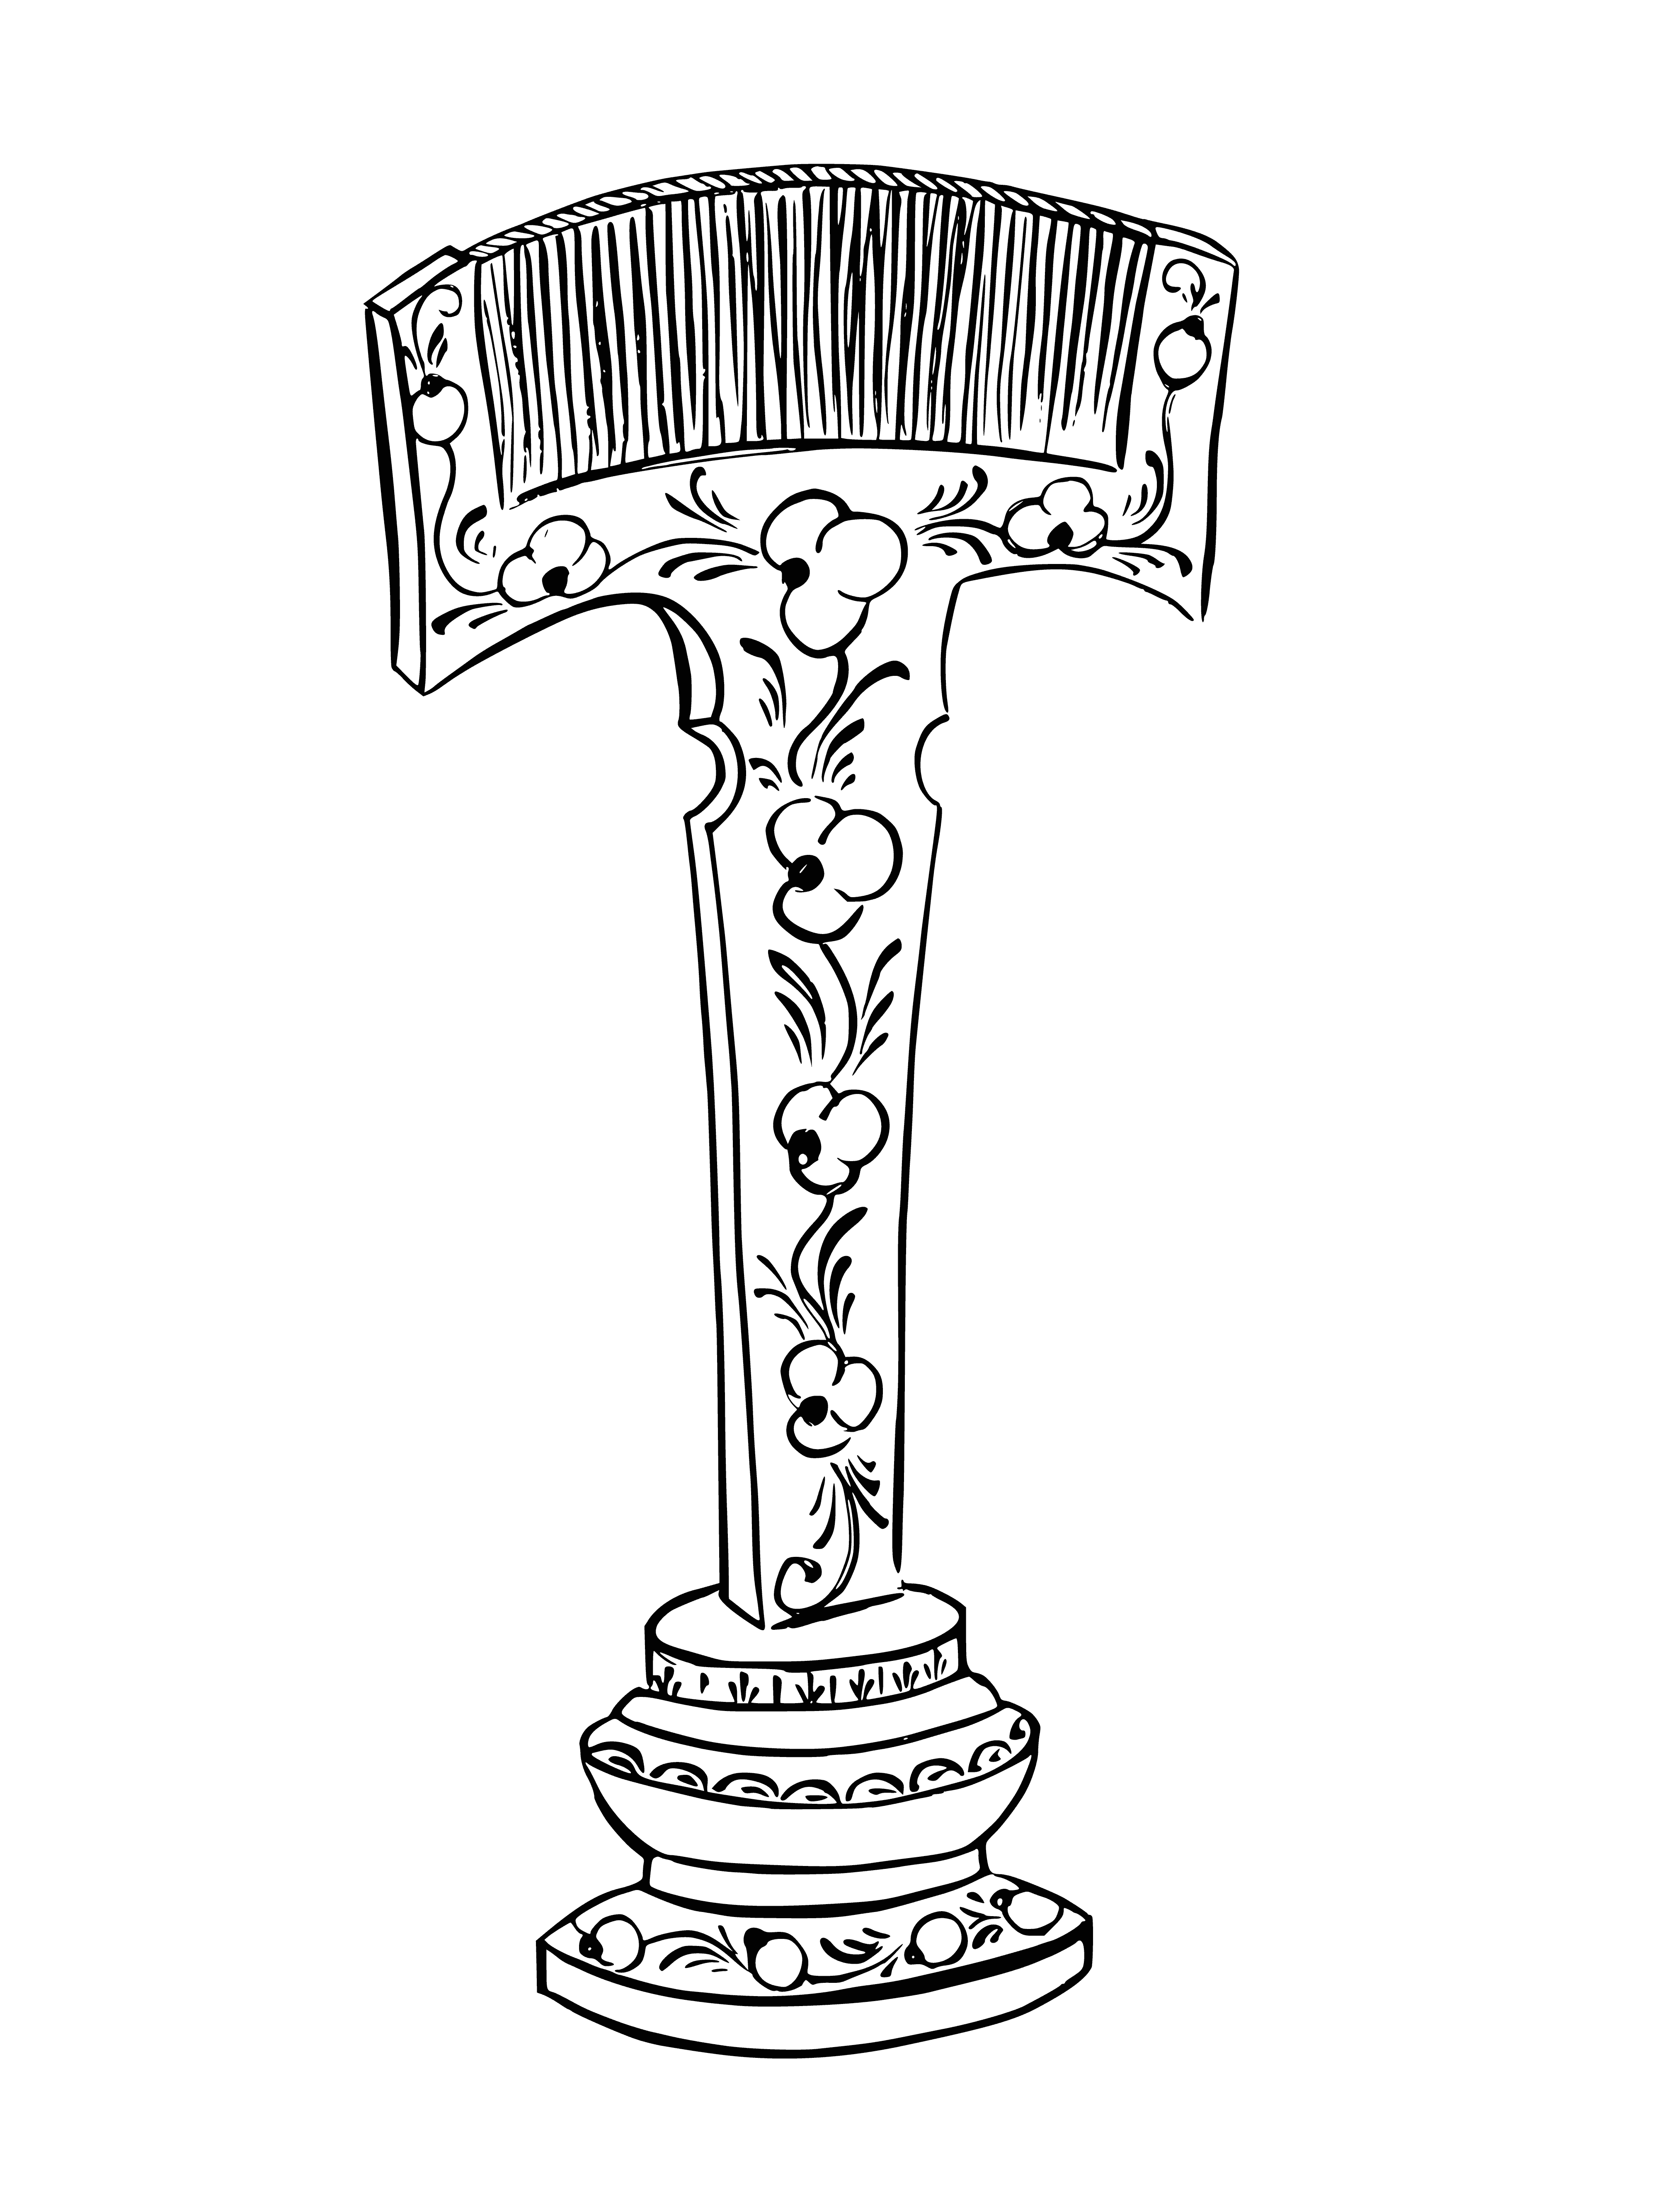 Crest coloring page